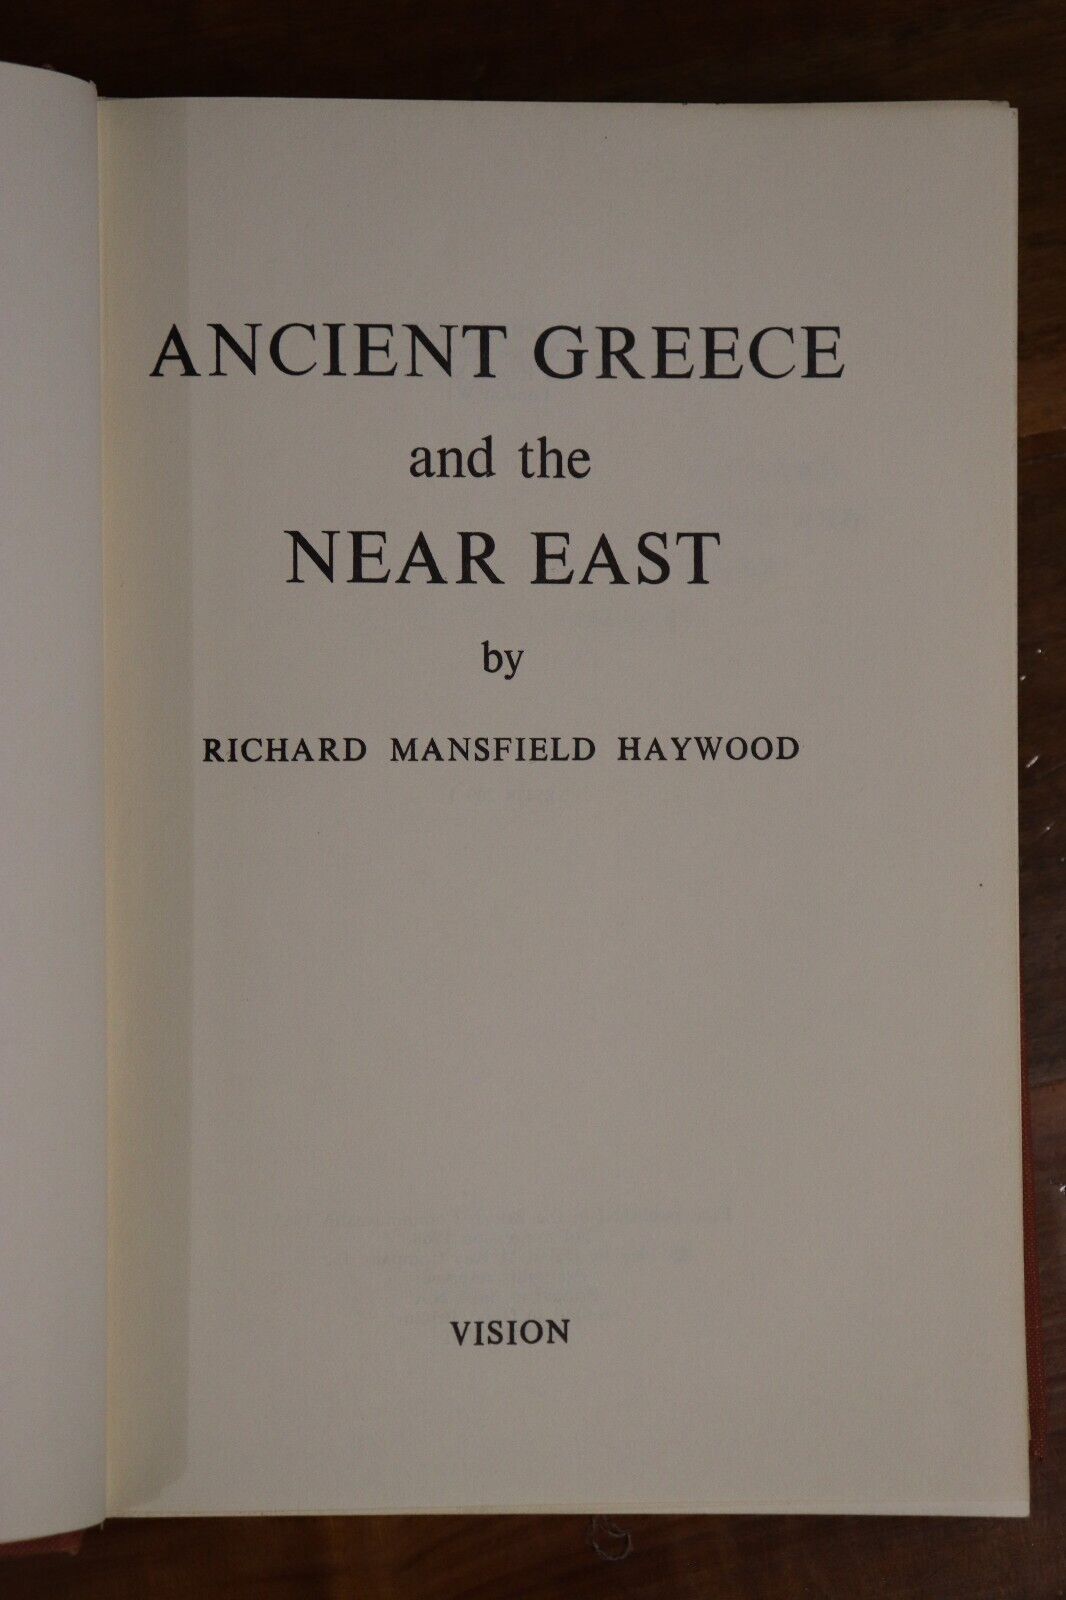 Ancient Greece & The Near East by RM Haywood - 1968 - Greek History Book - 0